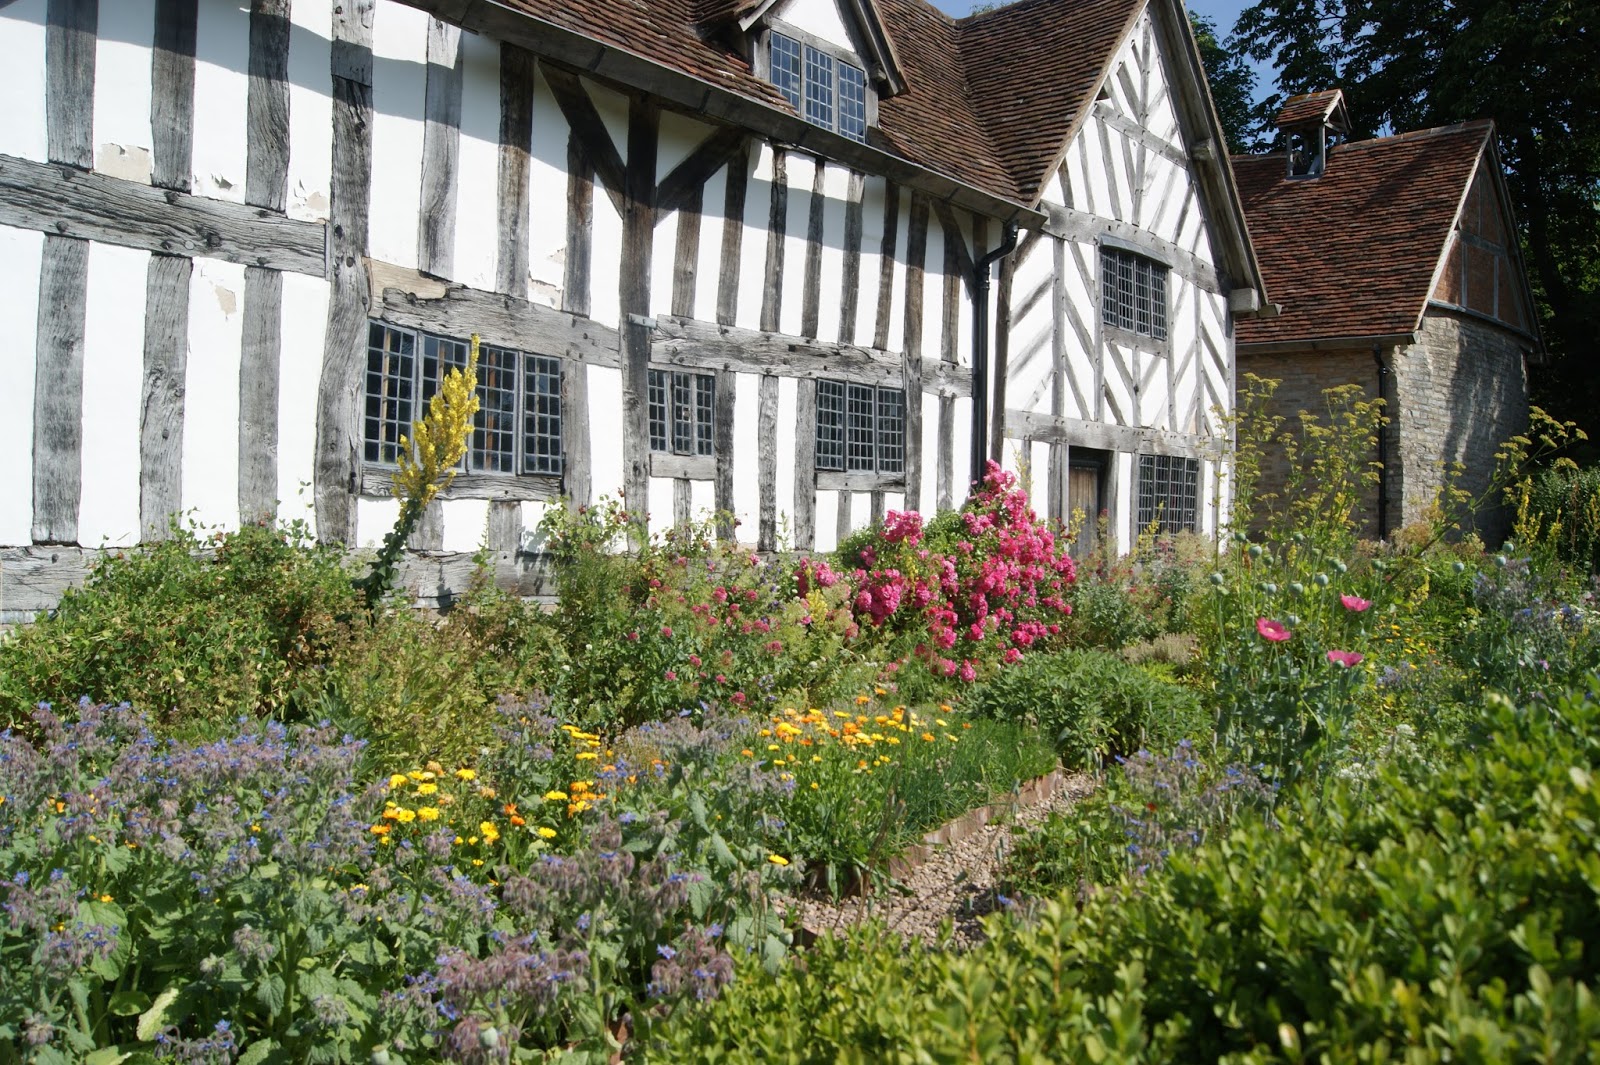 Mary Arden's Farm Shakespeare Stratford Cotswolds